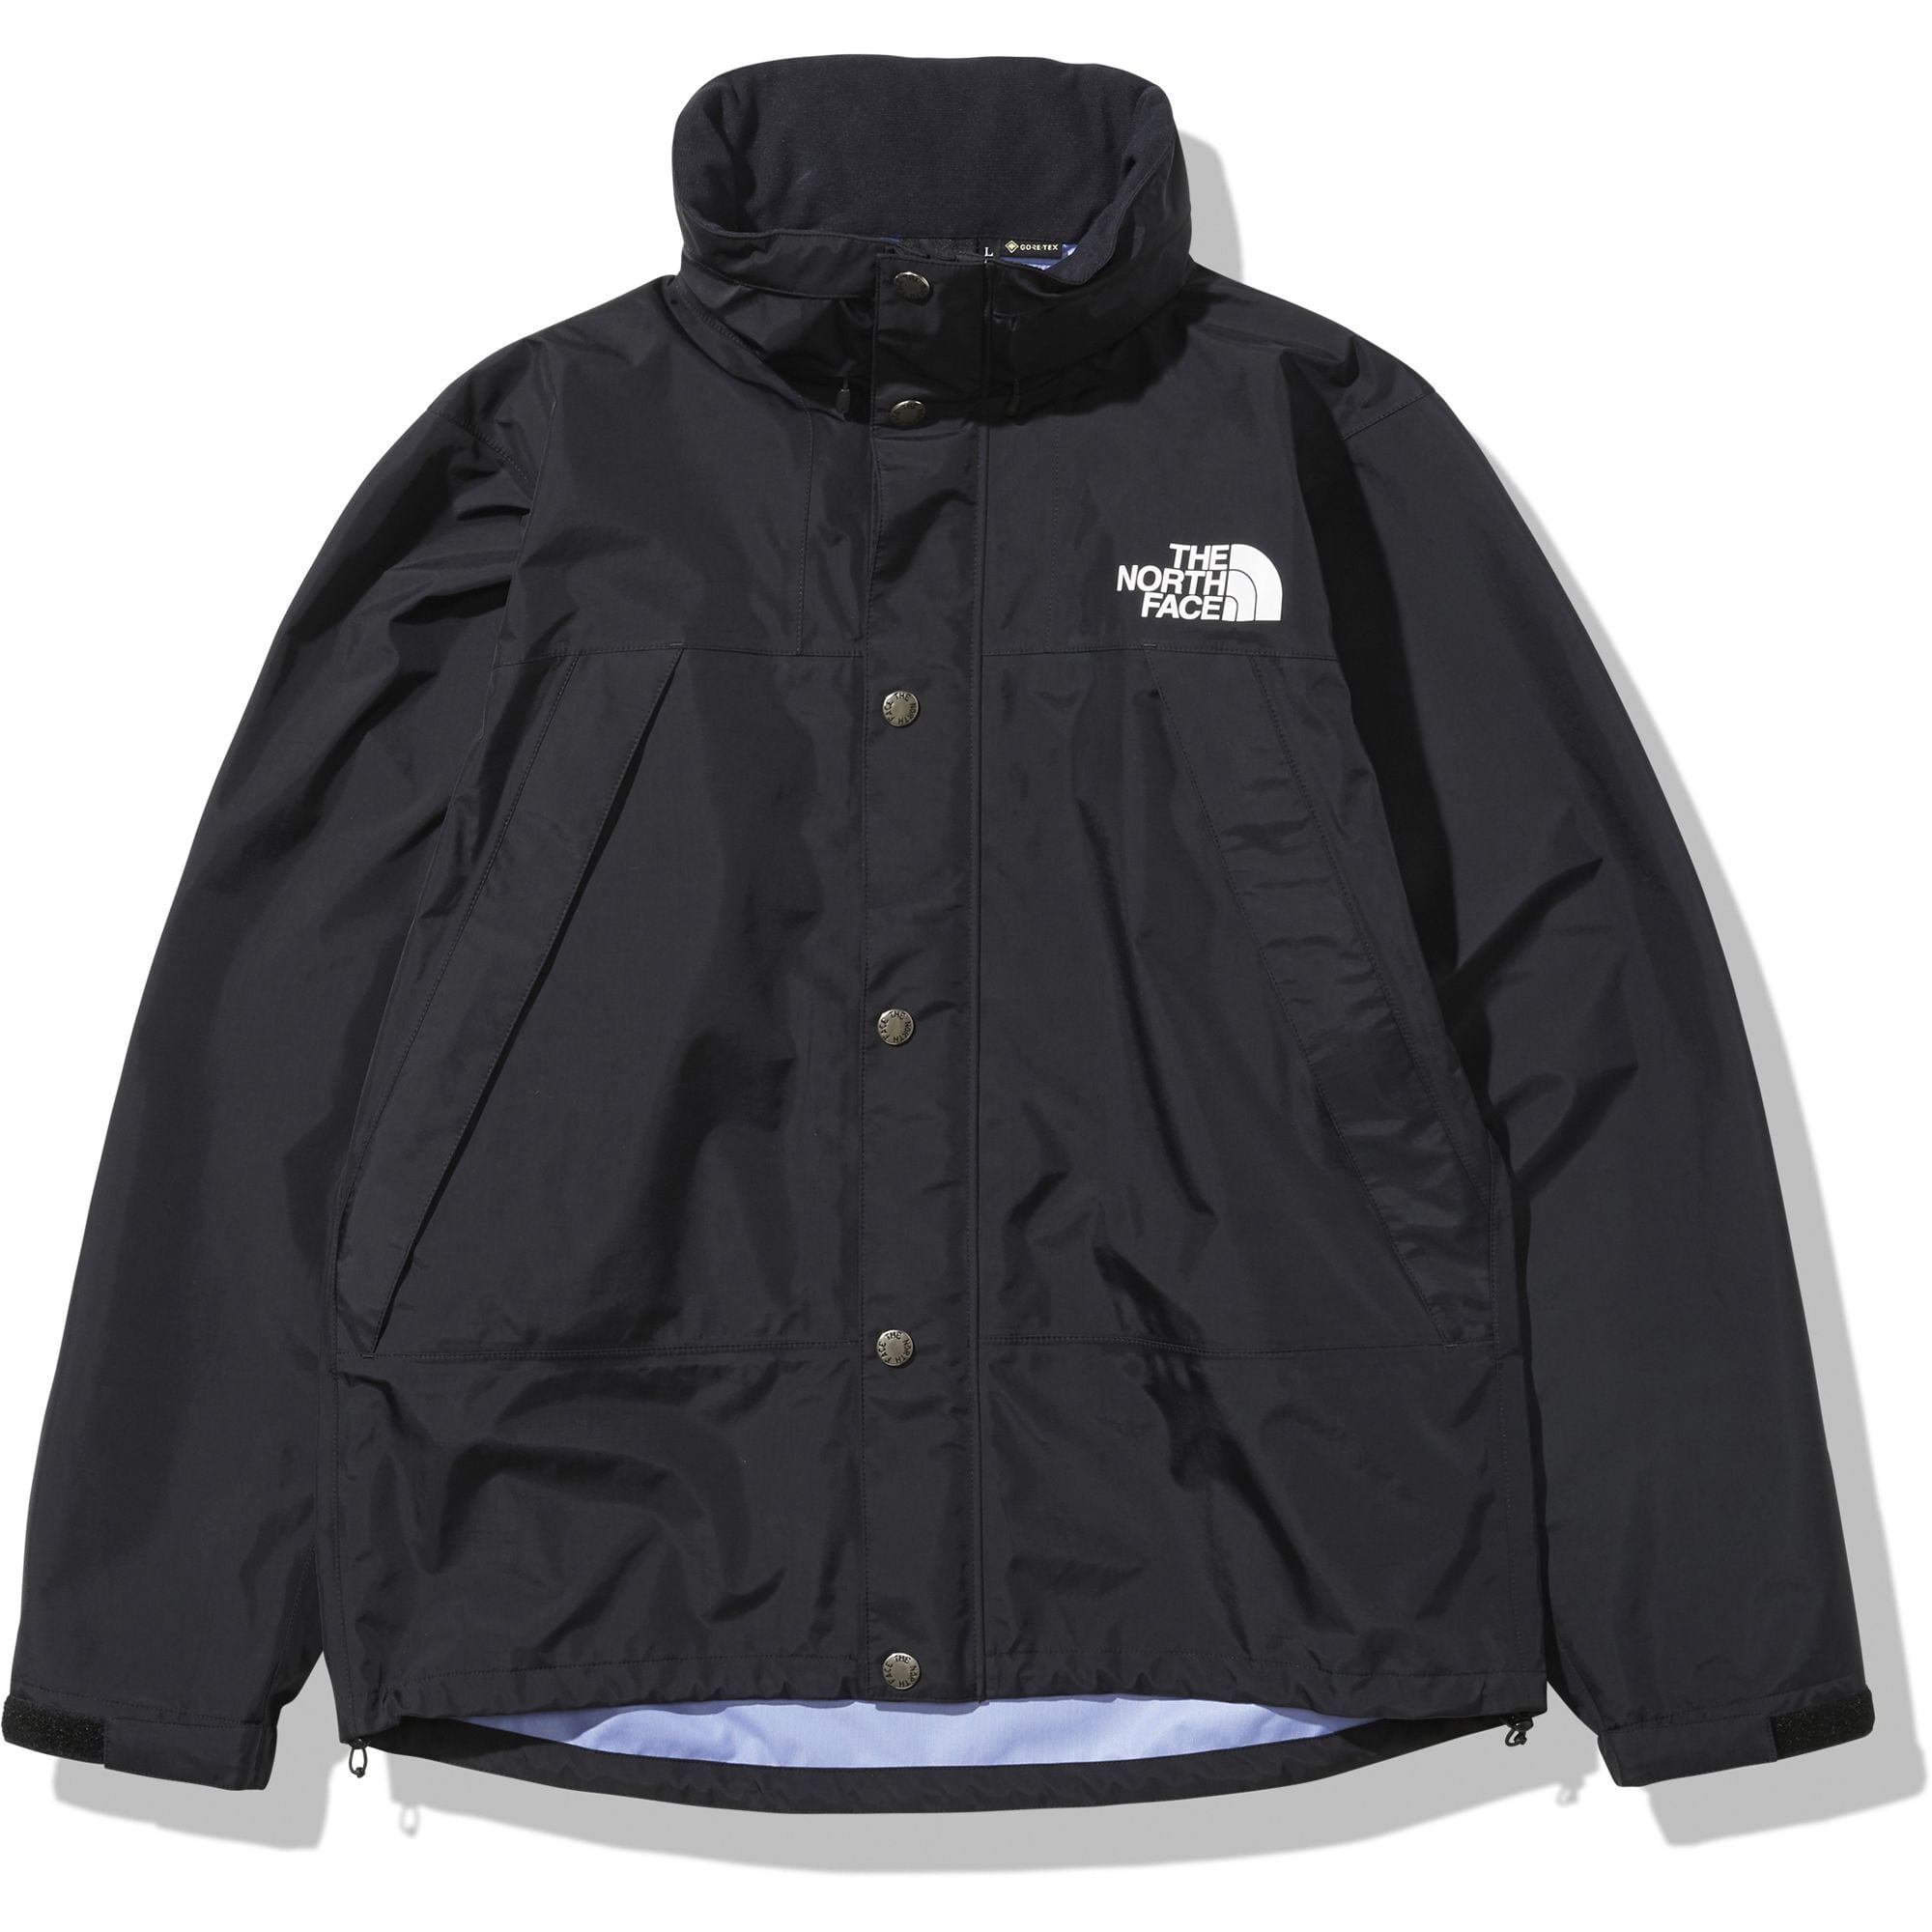 THE NORTH FACE / MOUNTAIN RAINTEX JACKET | st. valley house - セントバレーハウス  powered by BASE